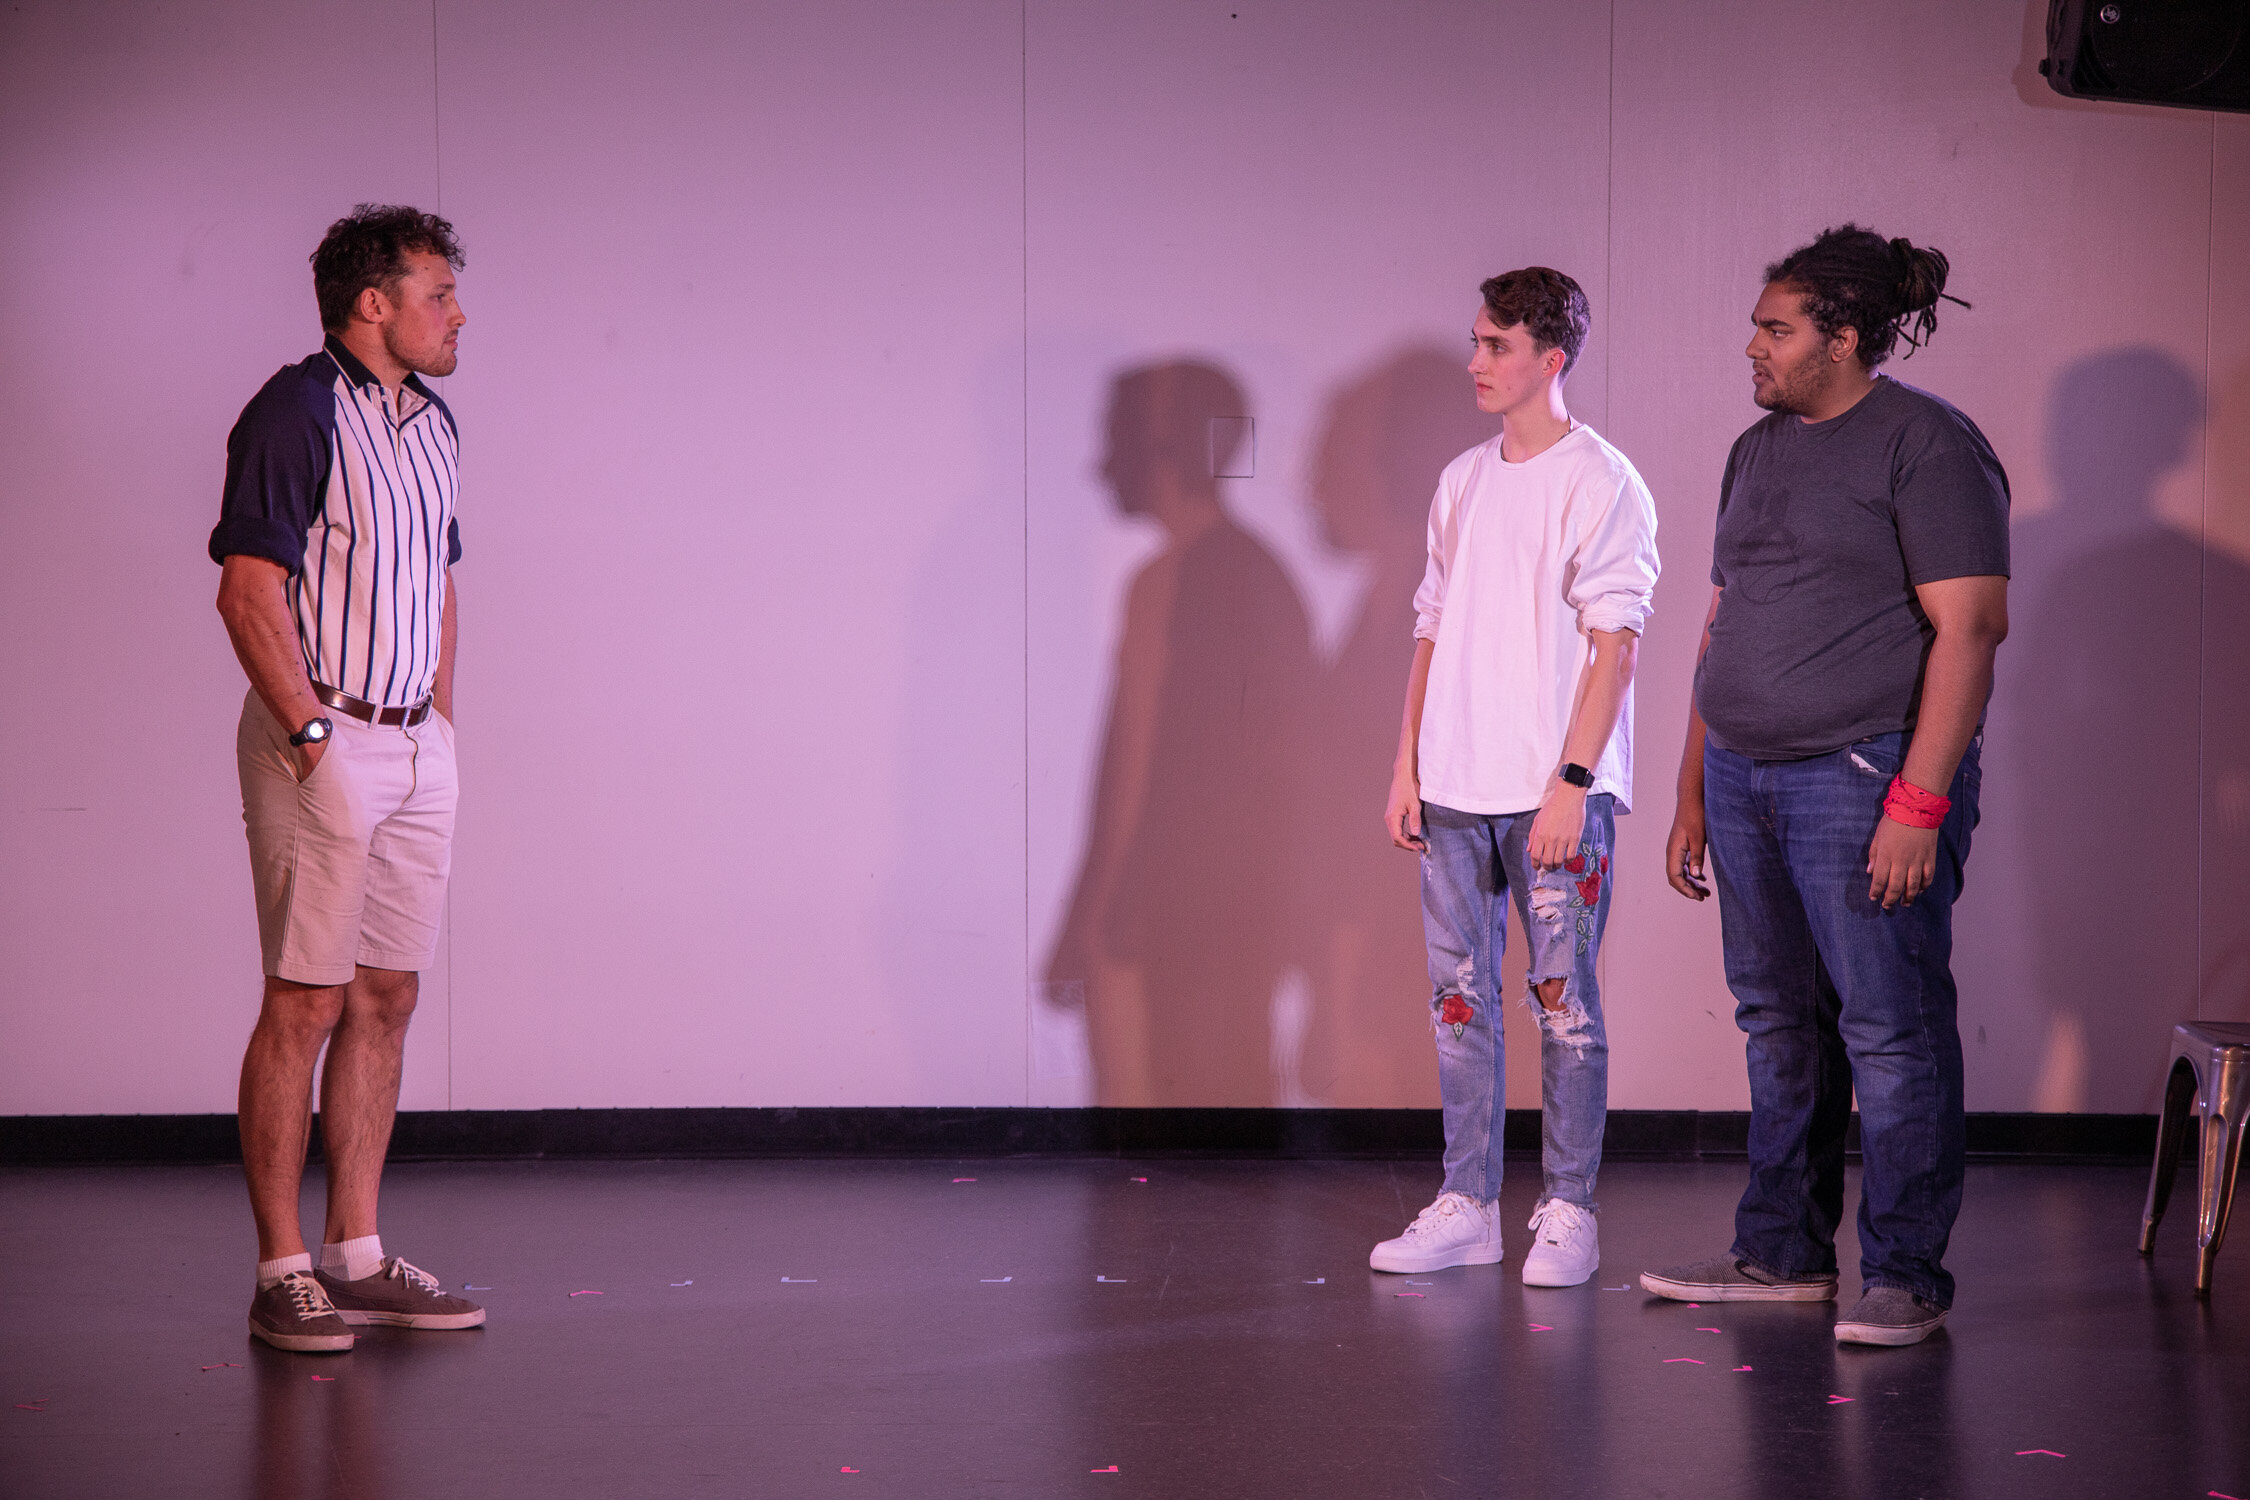  Production Pictures by: Rene Burgos  Featuring: (L-R) David Erasmus, Caleb Dyks, Isaac George-Hotchkiss 